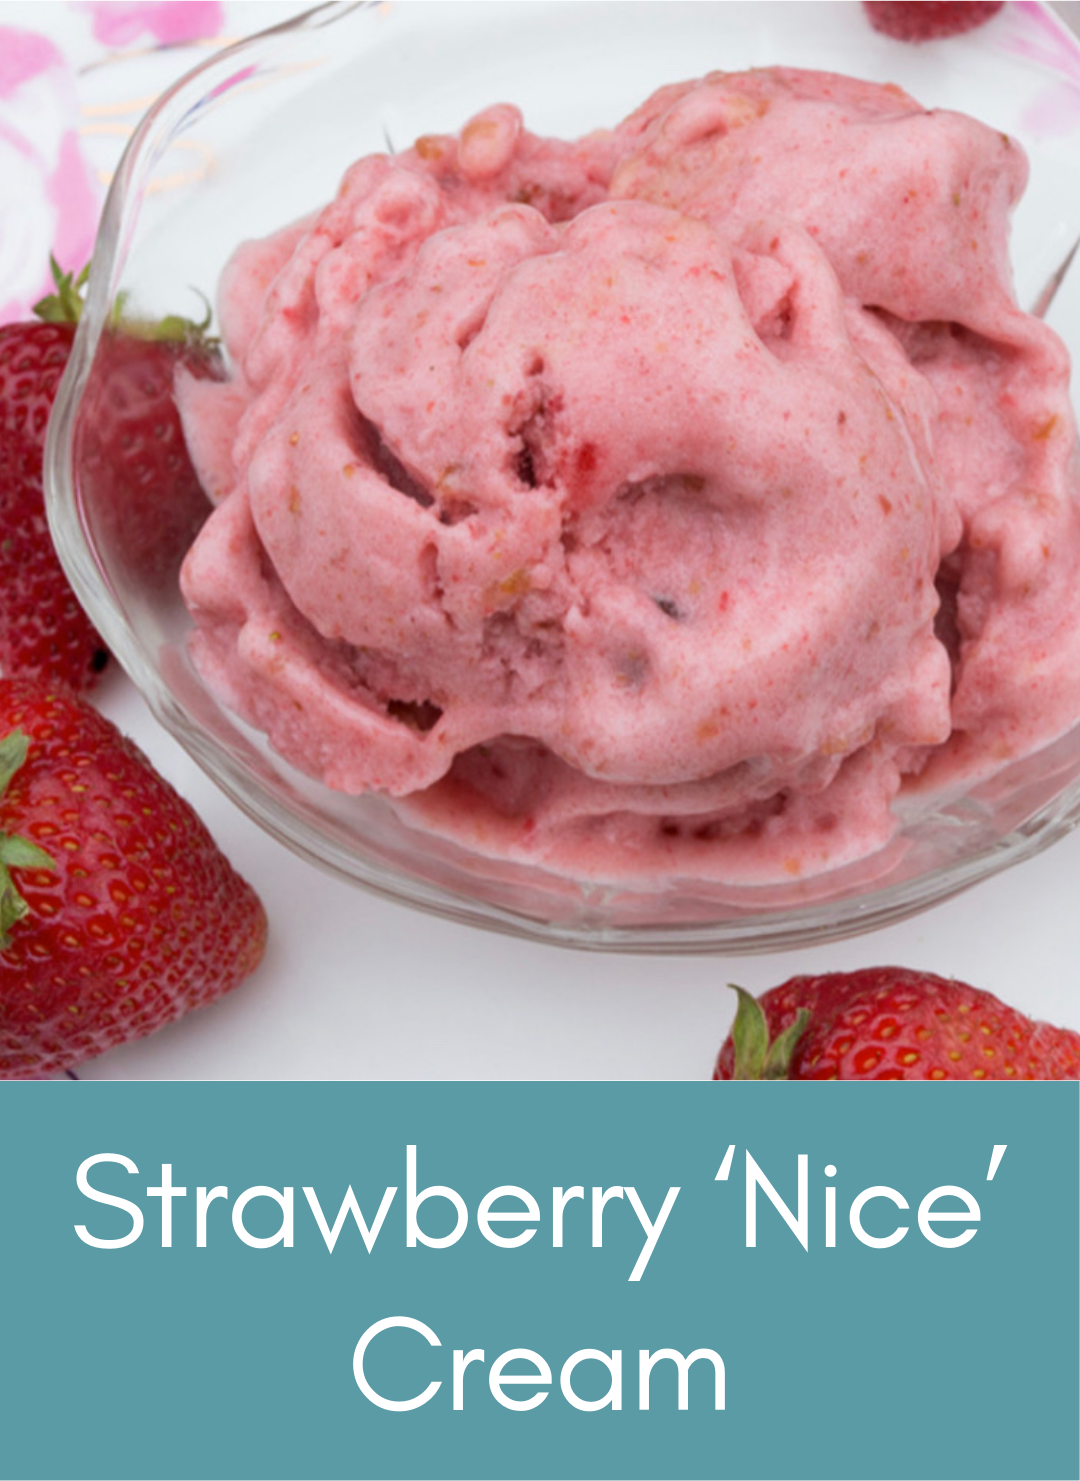 whole food plant based Strawberry ice cream Picture with link to recipe